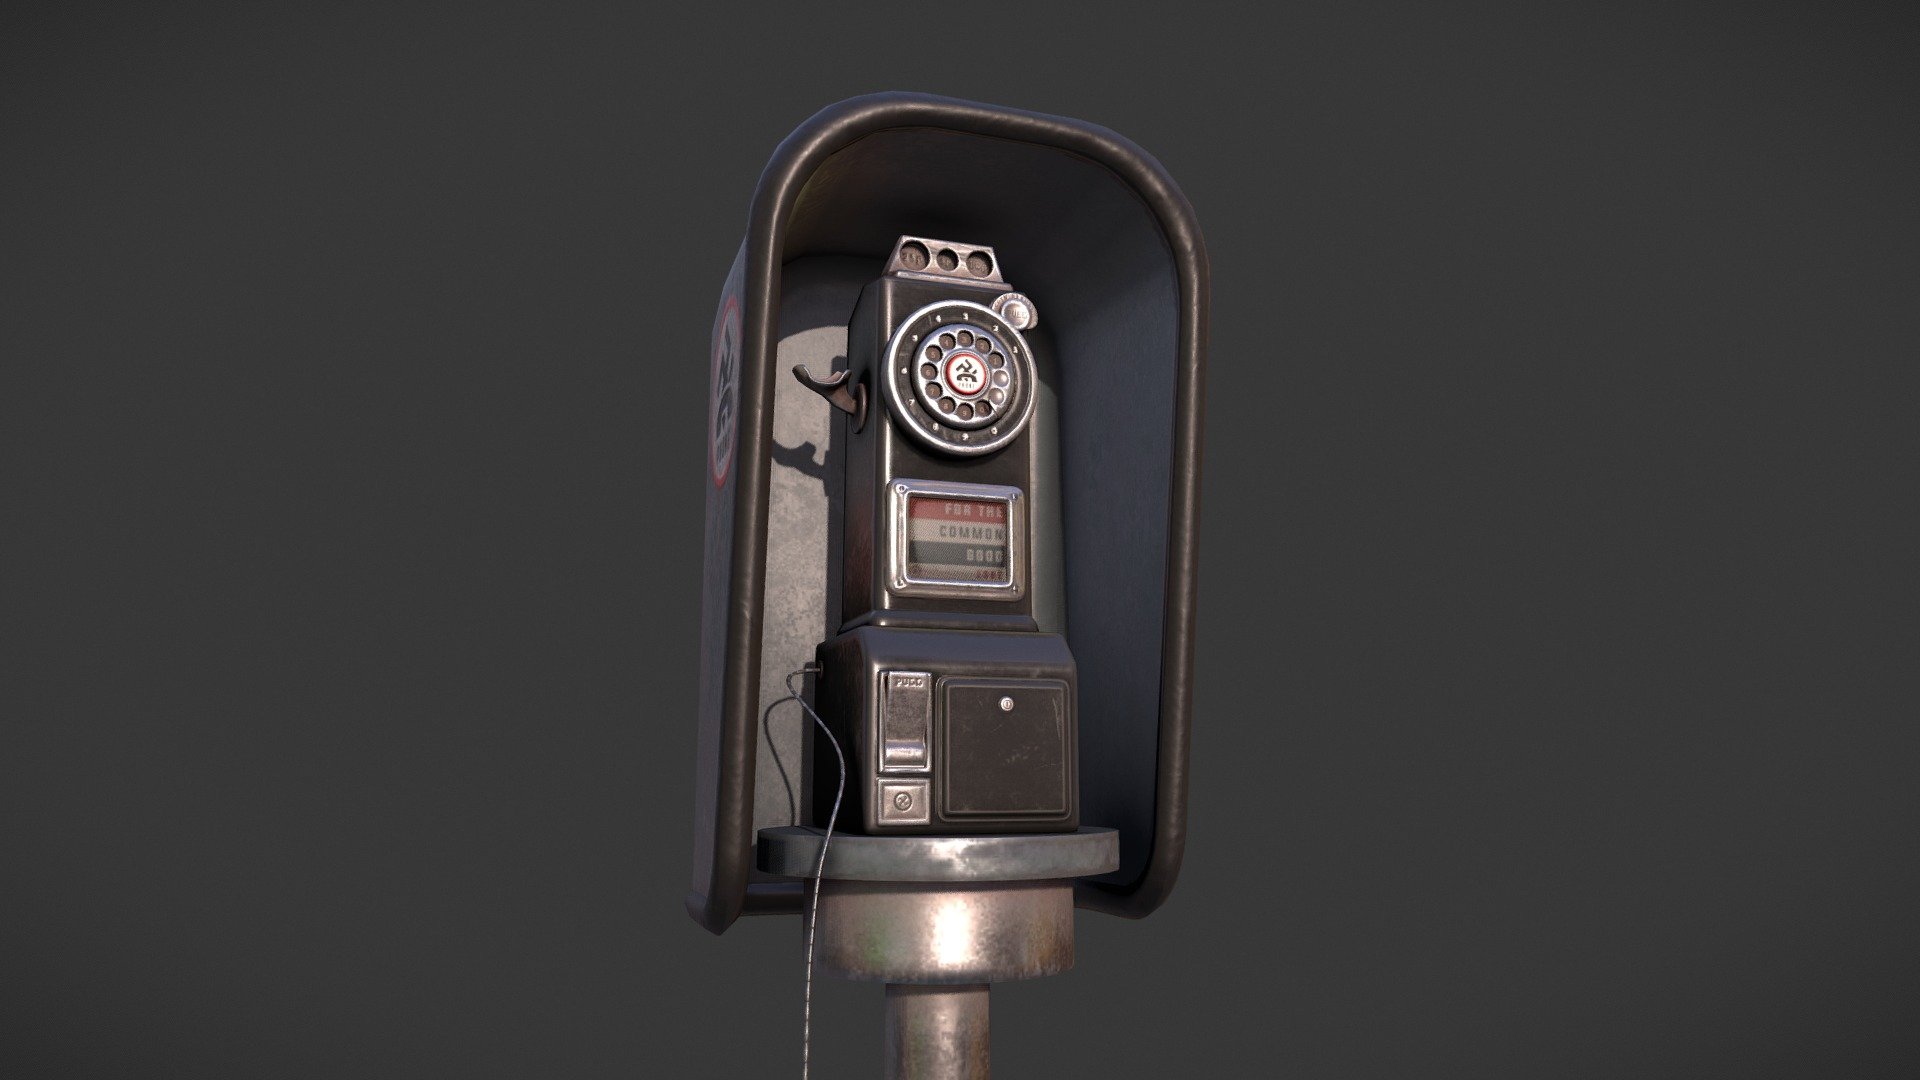 A payphone abandoned mid-call....

Made for an environment I am working on set in the world of &ldquo;The Man in the High Castle